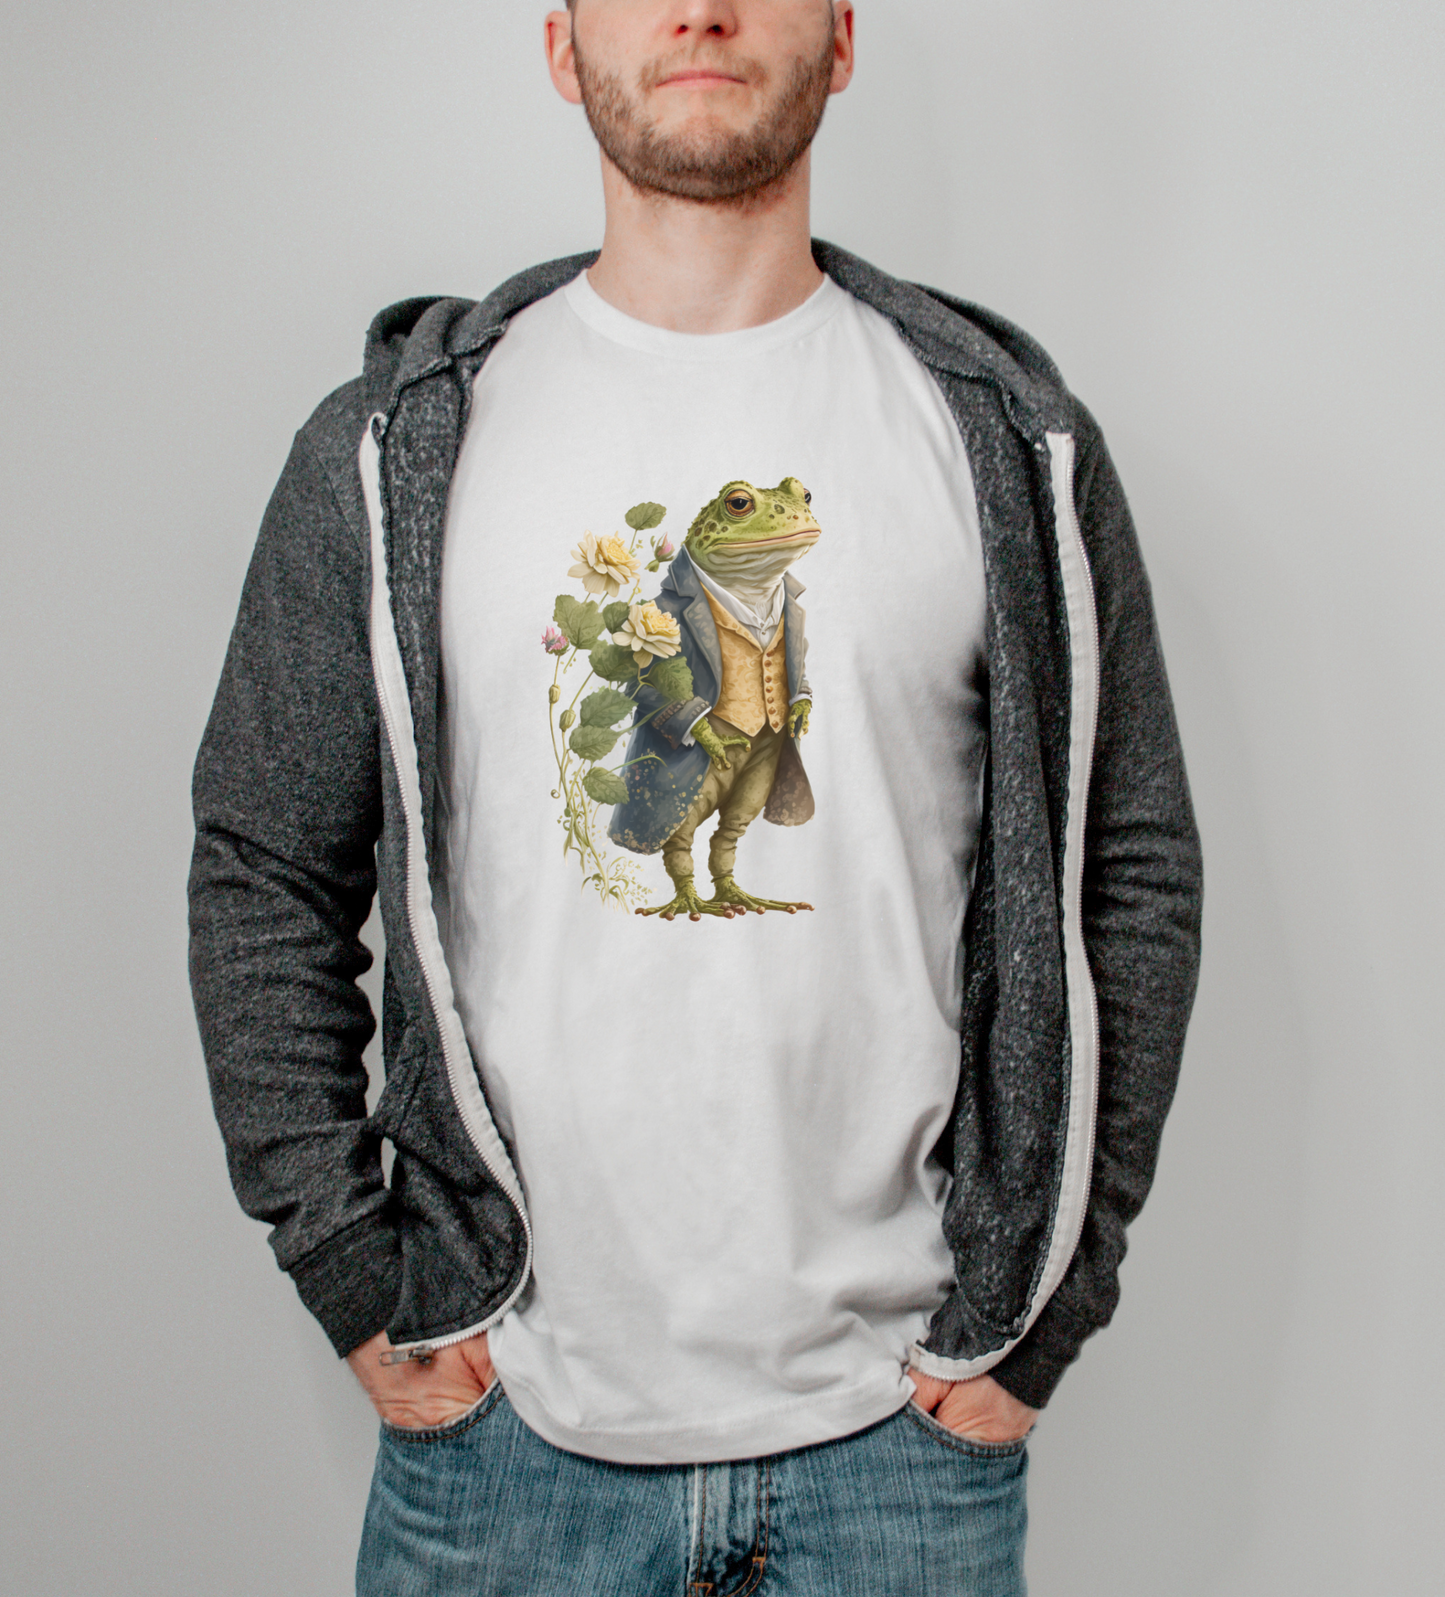 Toad tshirt for woman and men Frog shirt for toad lover and frog lover.